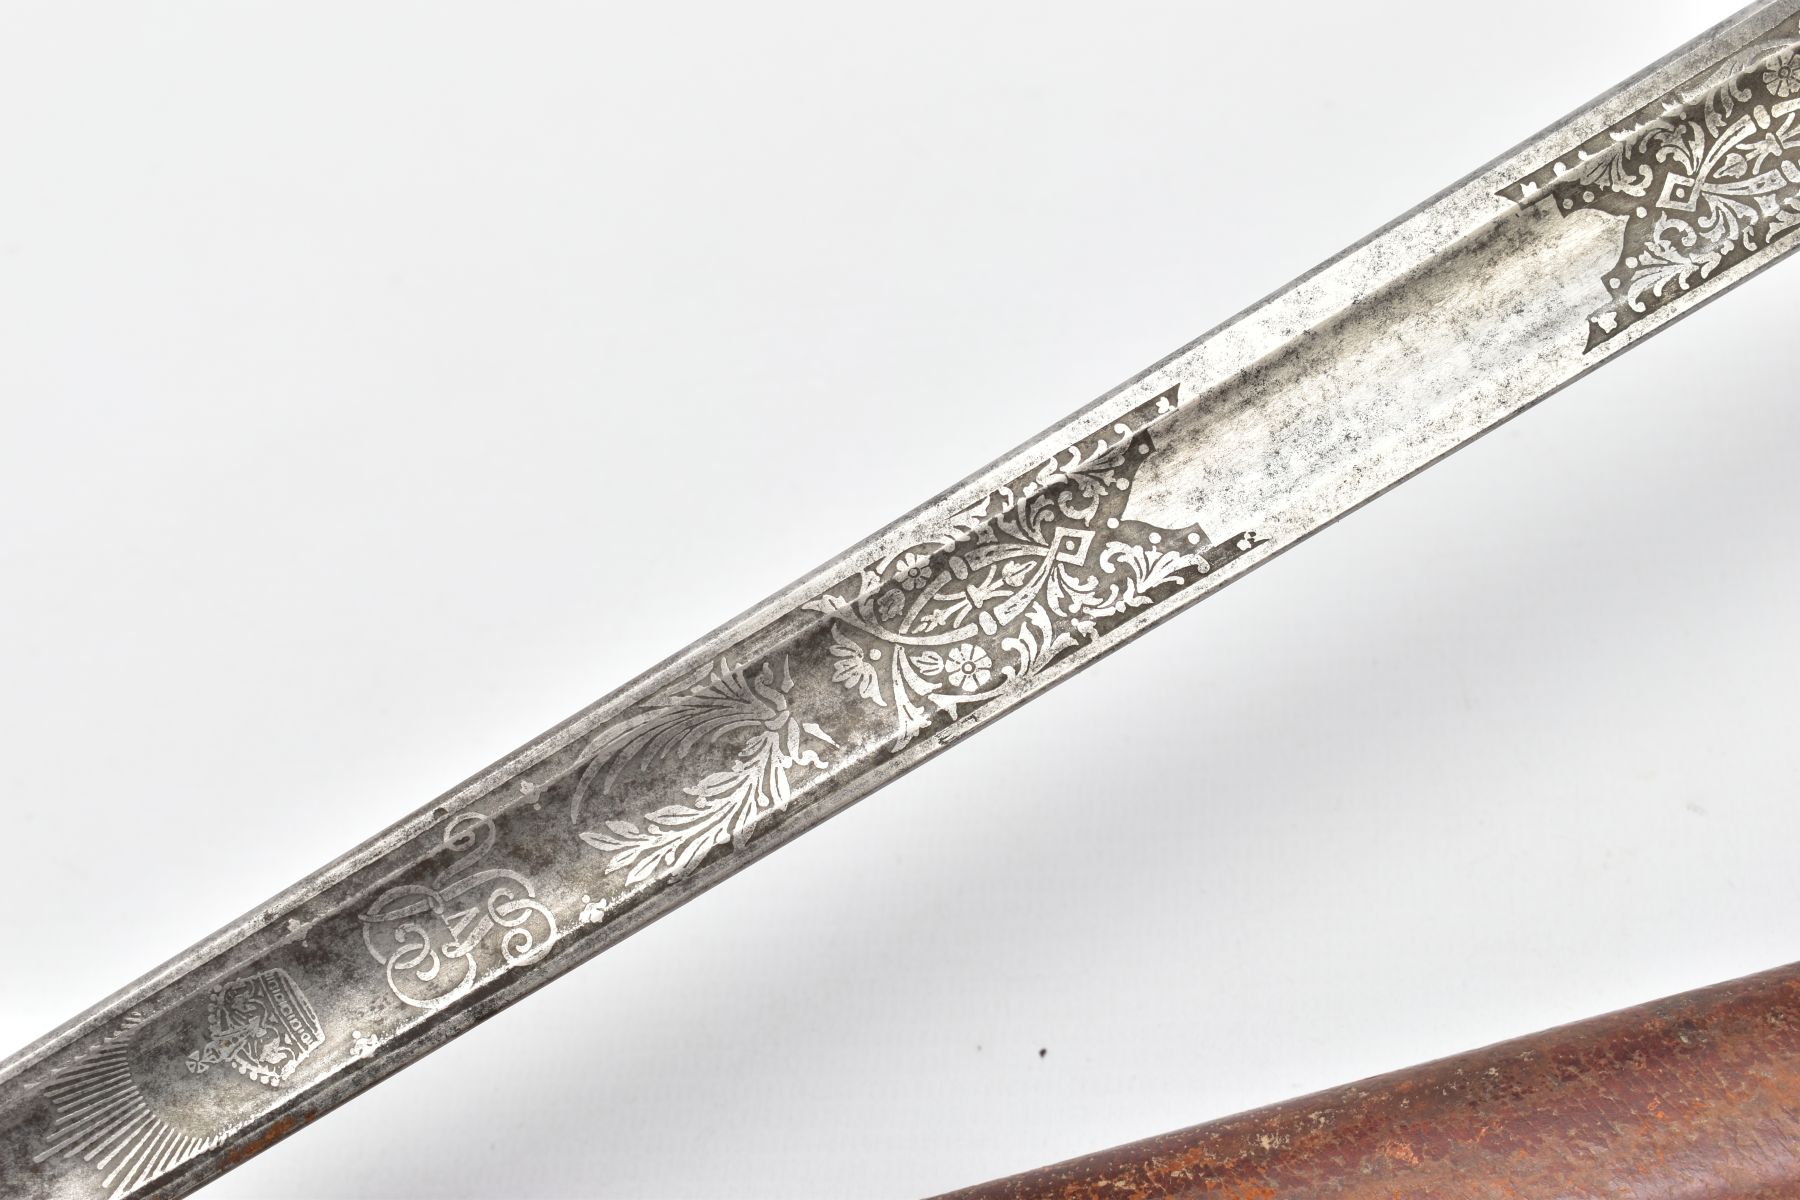 A FENTON BROTHERS LTD, SHEFFIELD 1897 PATTERN INFANTRY OFFICERS SWORD AND SCABBARD, the blade is - Image 12 of 15